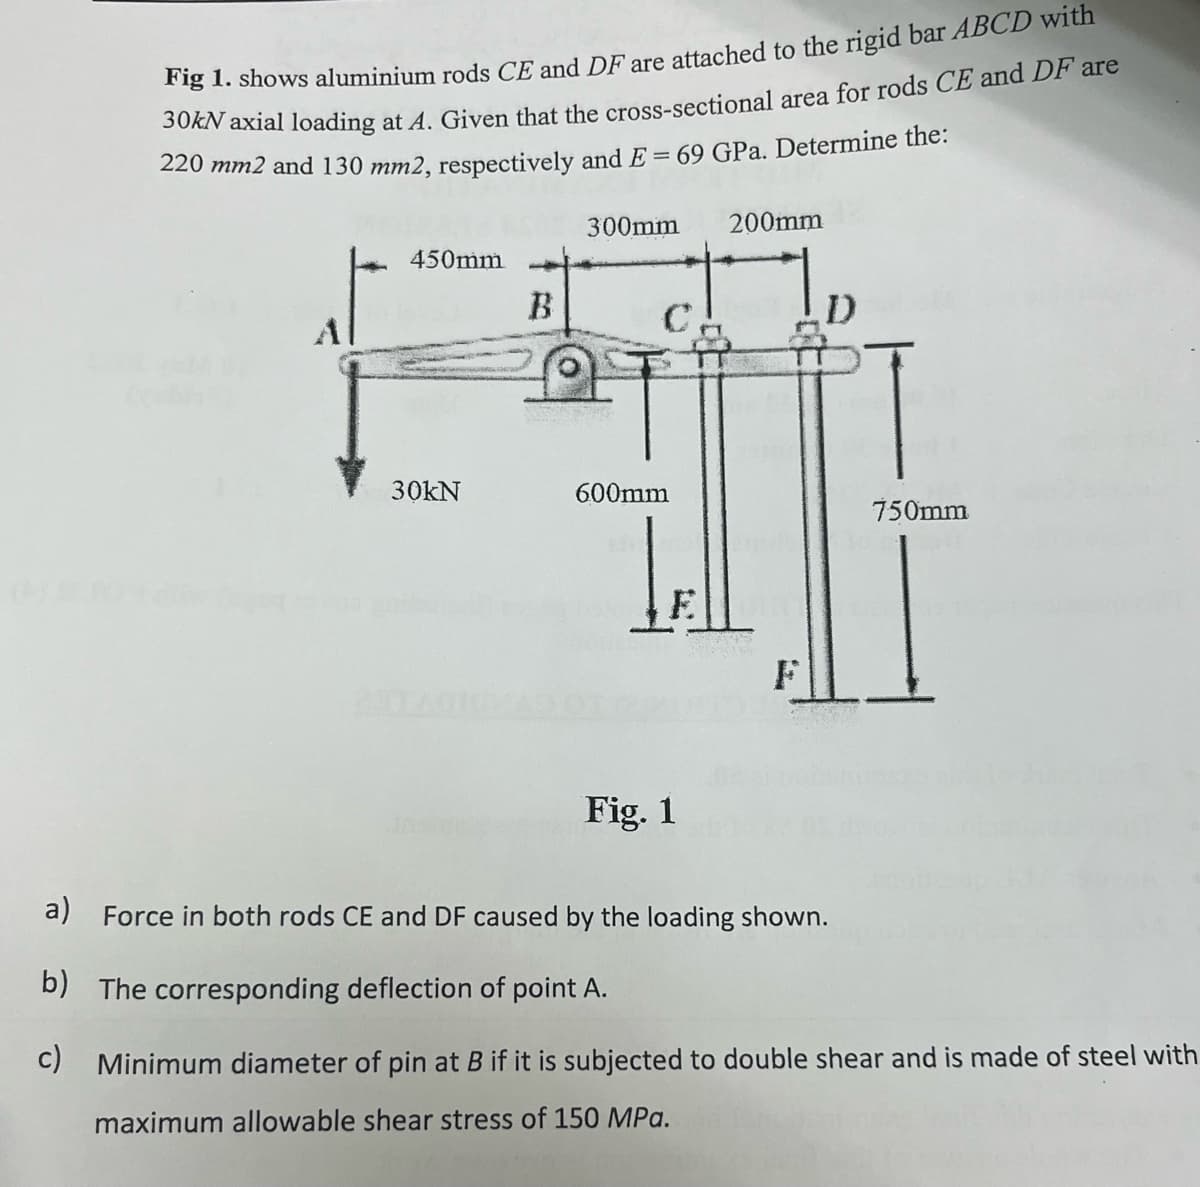 Fig 1. shows aluminium rods CE and DF are attached to the rigid bar ABCD with
30kN axial loading at A. Given that the cross-sectional area for rods CE and DF are
220 mm2 and 130 mm2, respectively and E = 69 GPa. Determine the:
450mm
Al
B
300mm 200mm
30kN
600mm
།།།
Fig. 1
F
750mm
a) Force in both rods CE and DF caused by the loading shown.
b) The corresponding deflection of point A.
c) Minimum diameter of pin at B if it is subjected to double shear and is made of steel with
maximum allowable shear stress of 150 MPa.